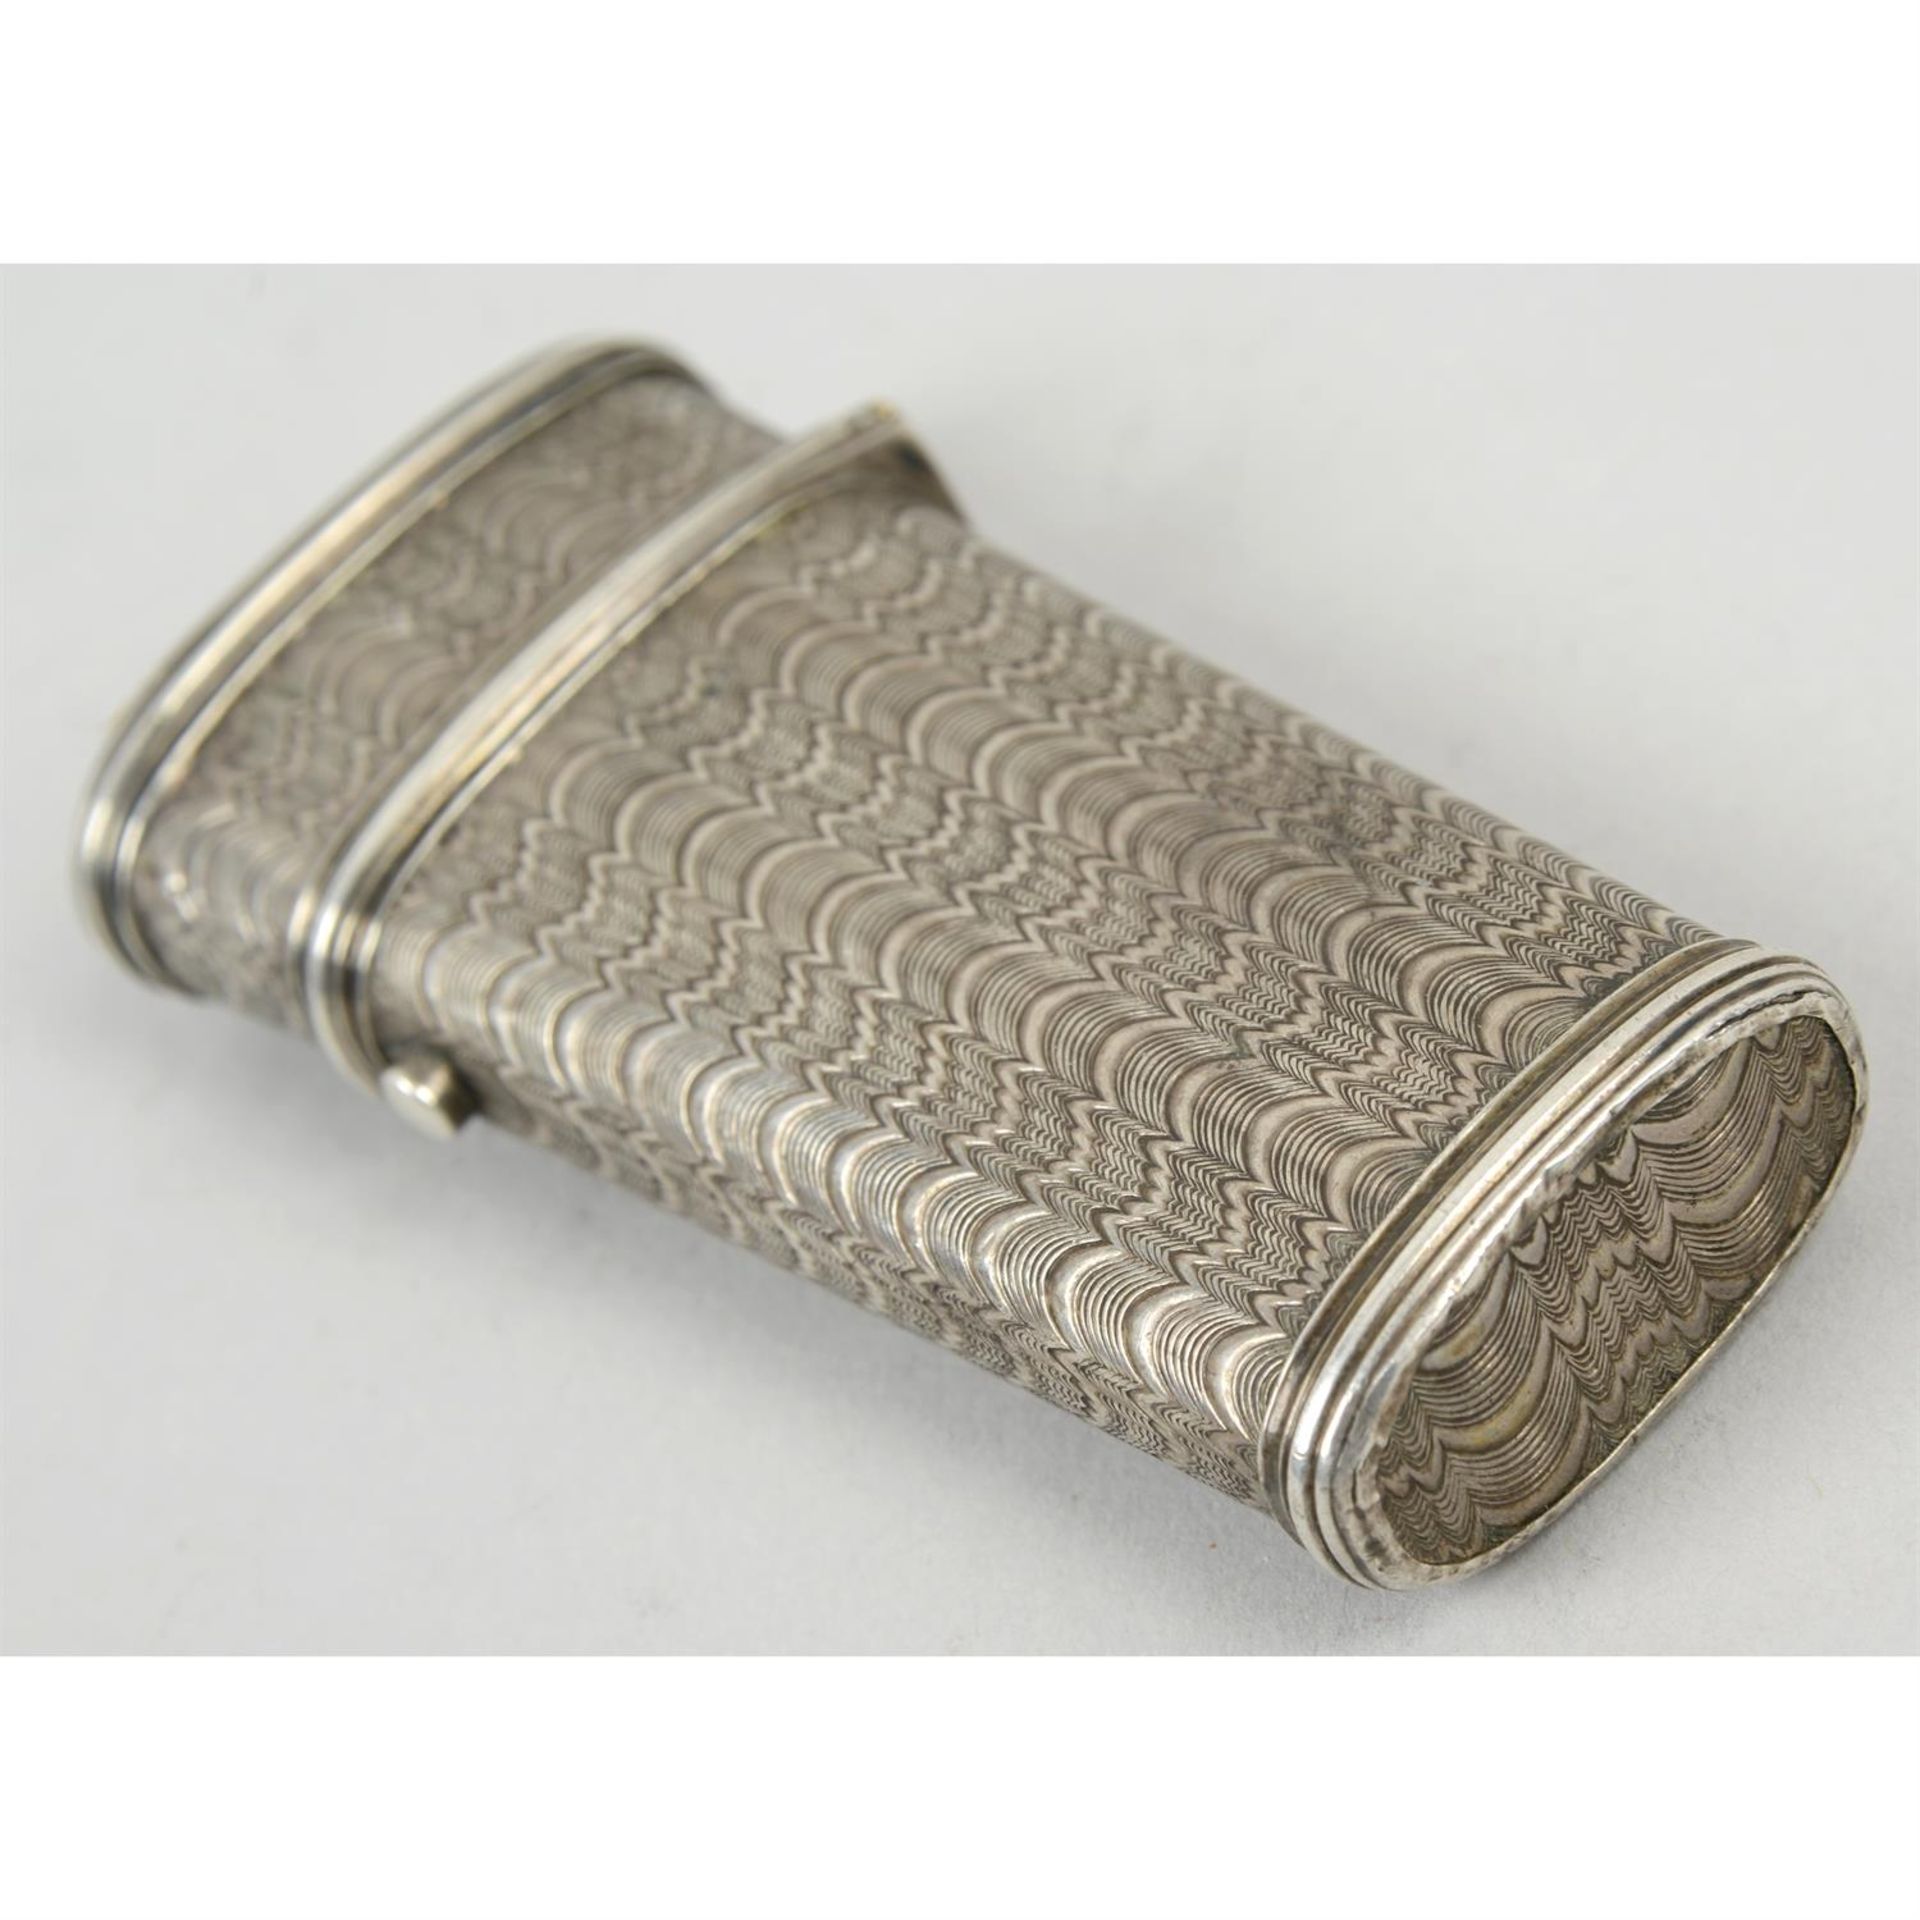 A silver mounted etui. - Image 3 of 3